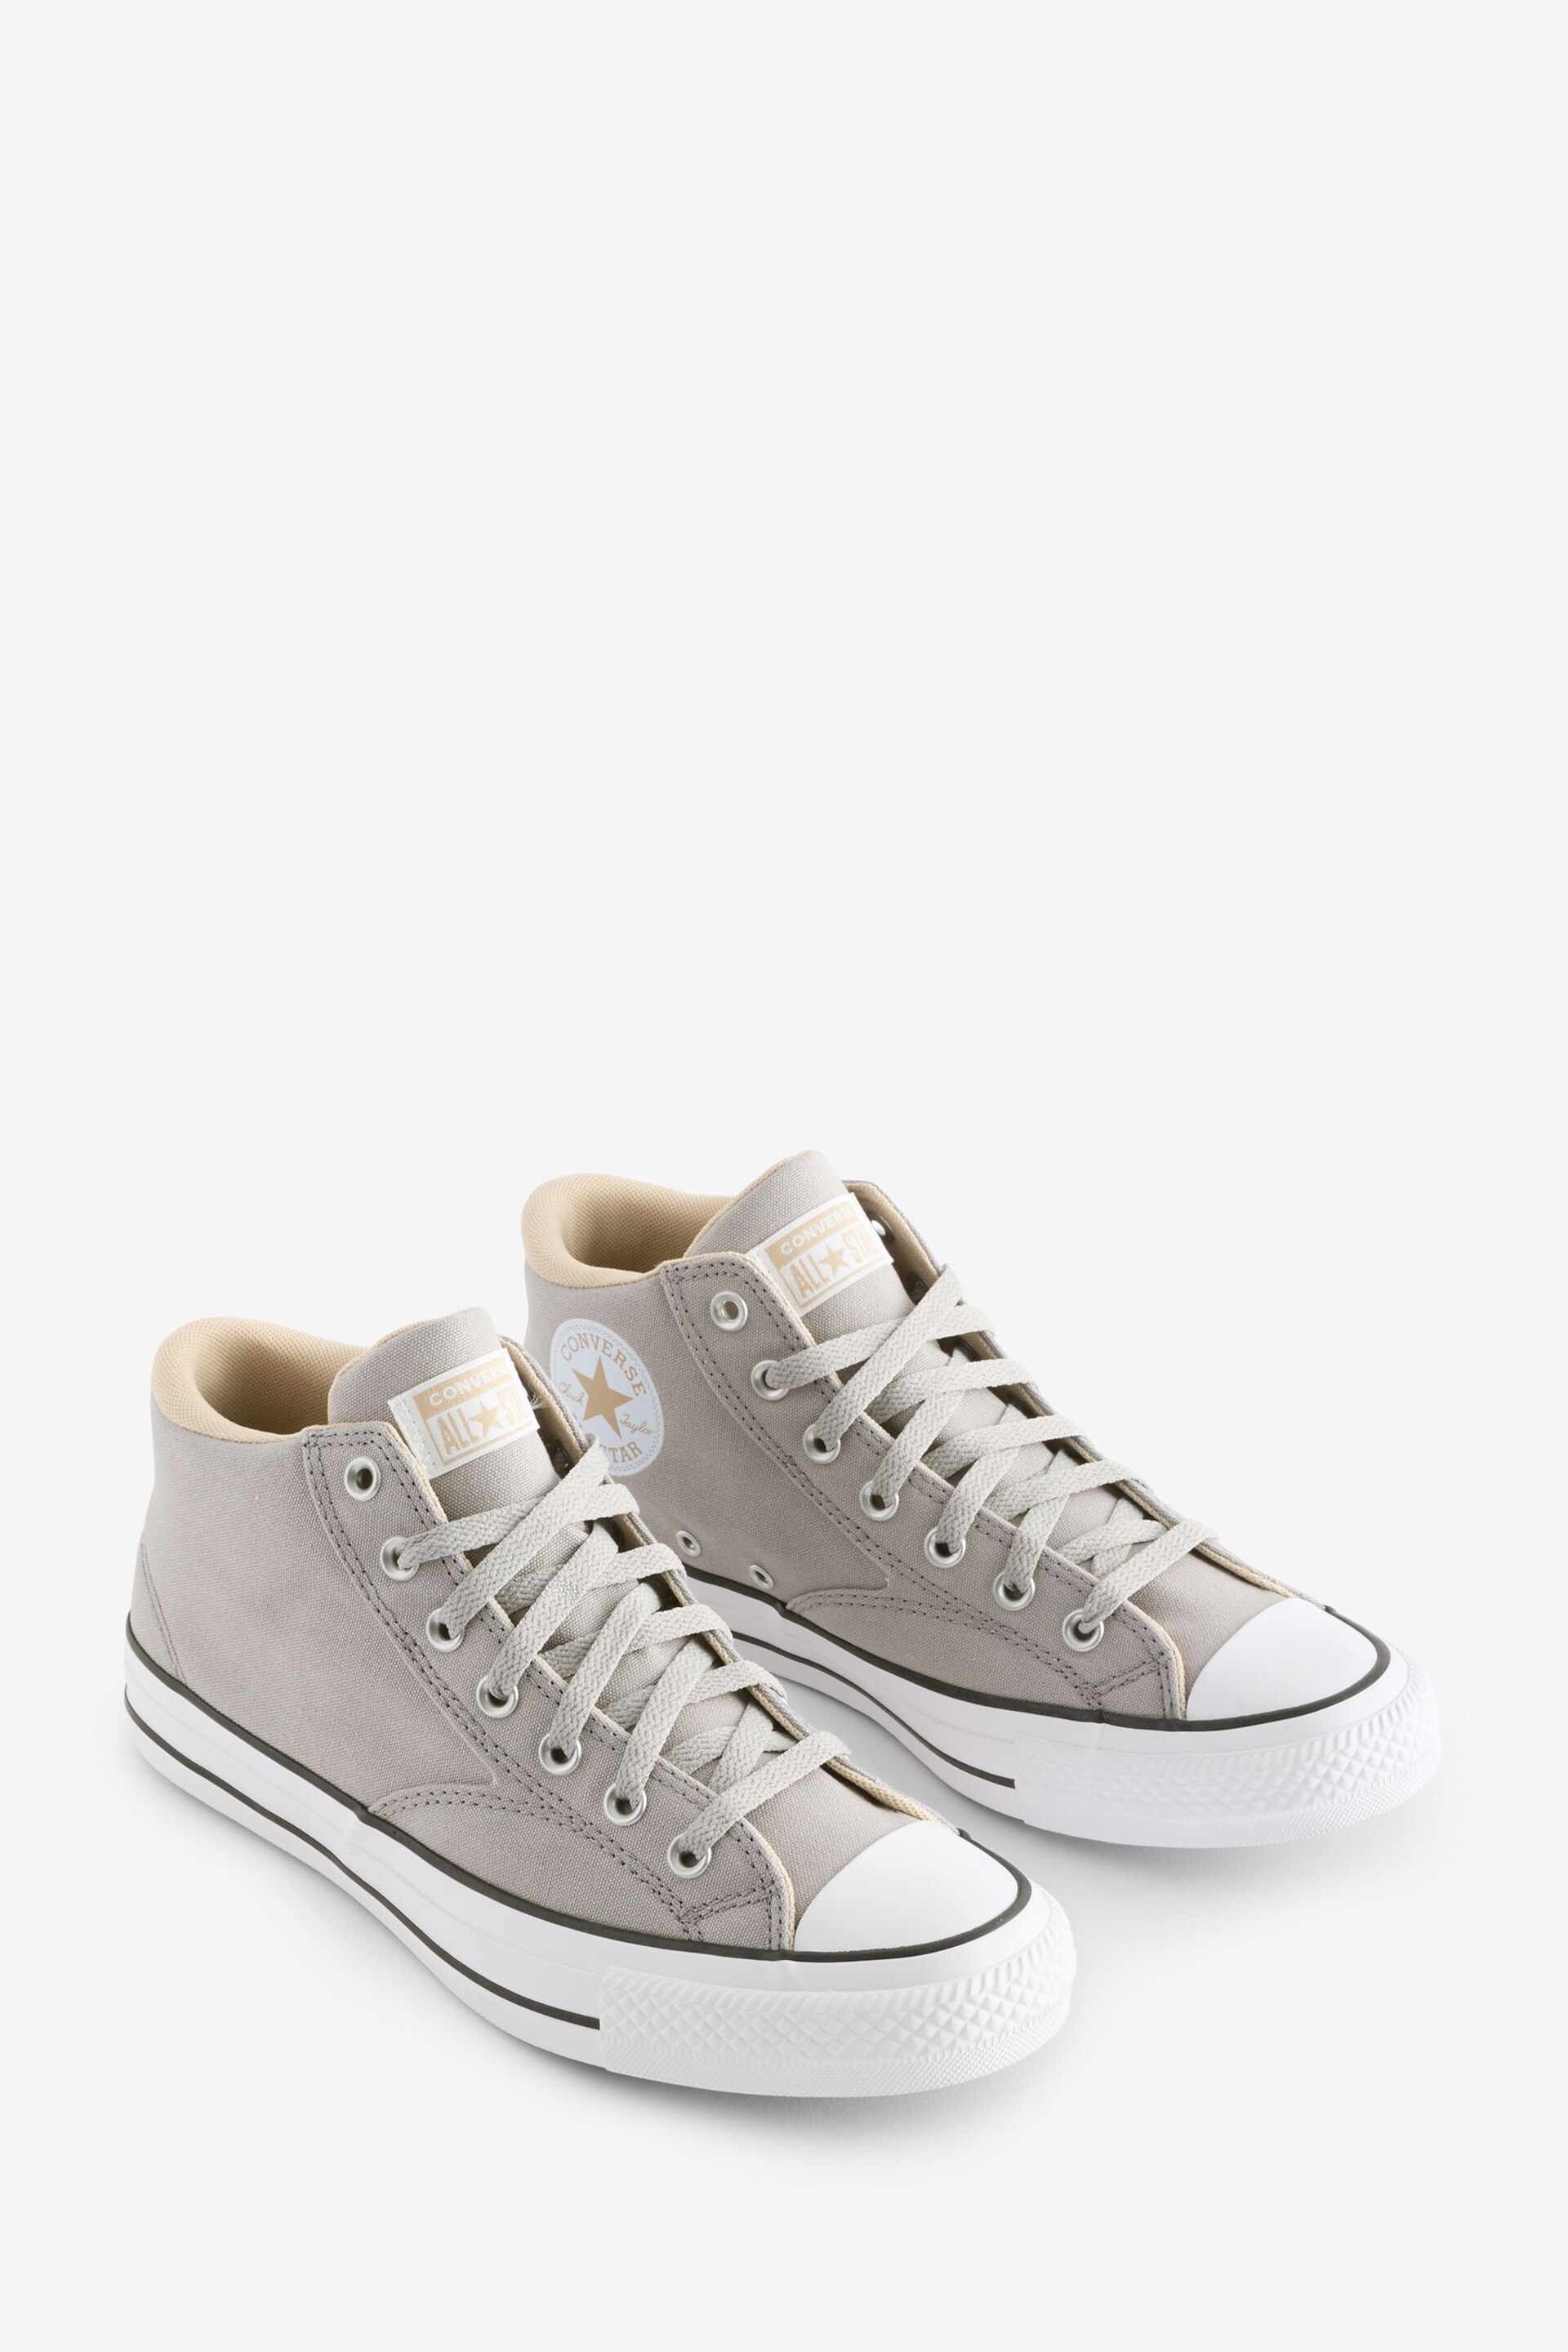 Converse Natural Chuck Taylor All Star Malden Street Trainers - Image 7 of 9